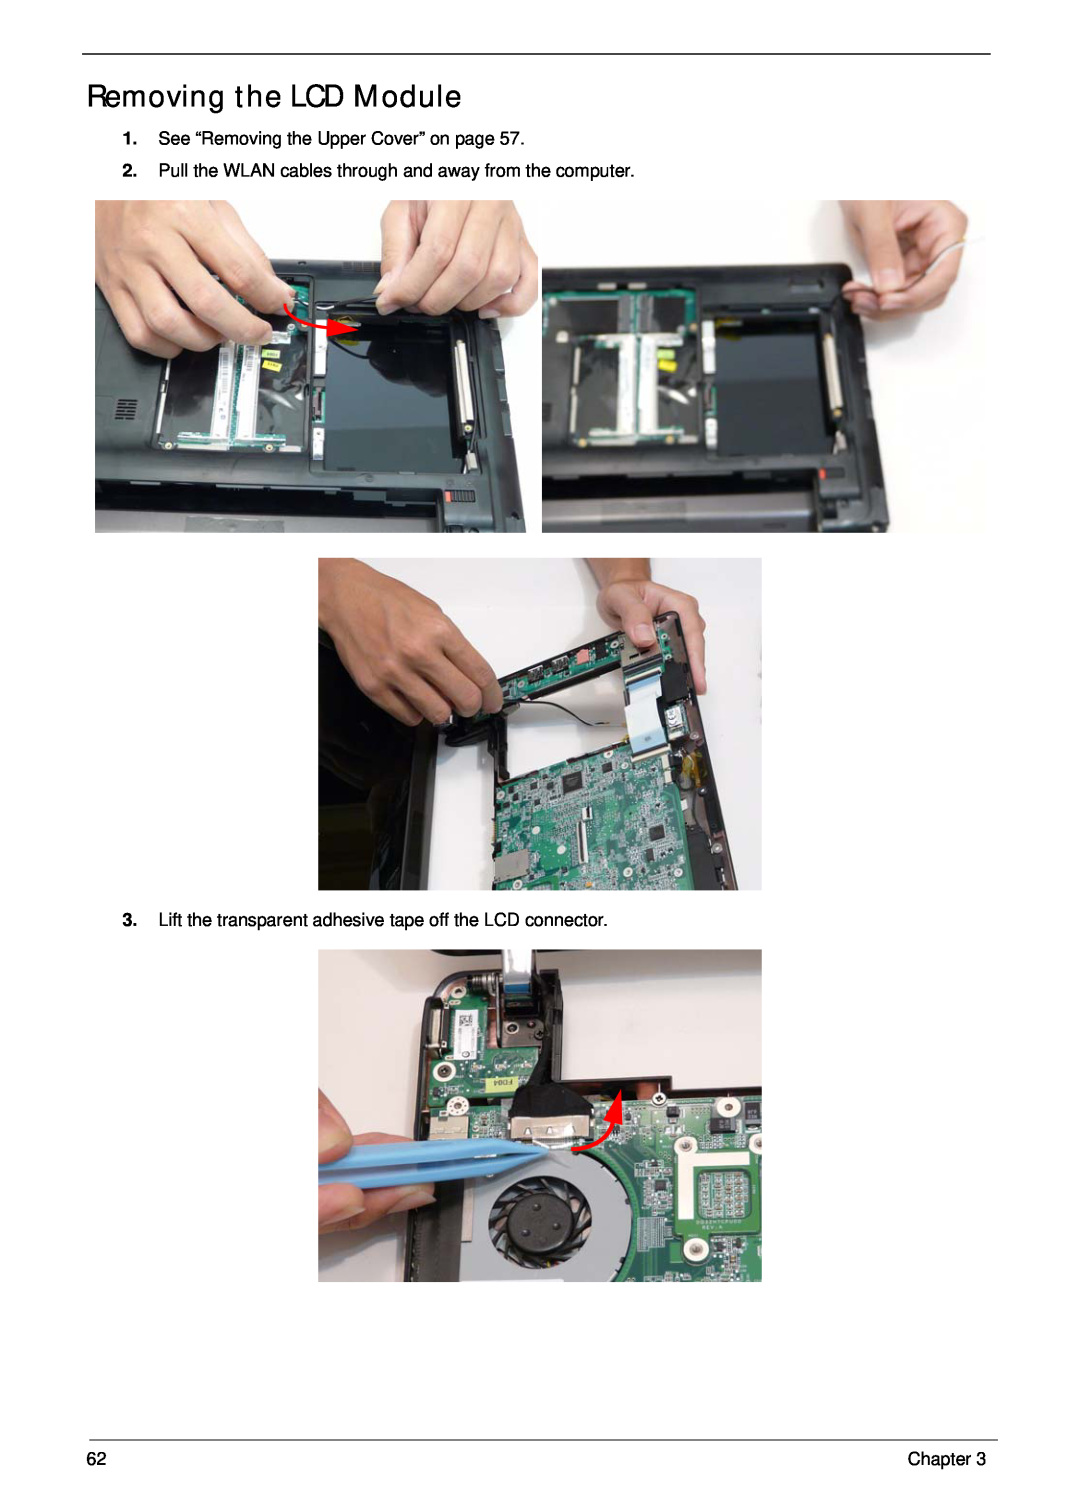 Gateway EC14 manual Removing the LCD Module, See “Removing the Upper Cover” on page 